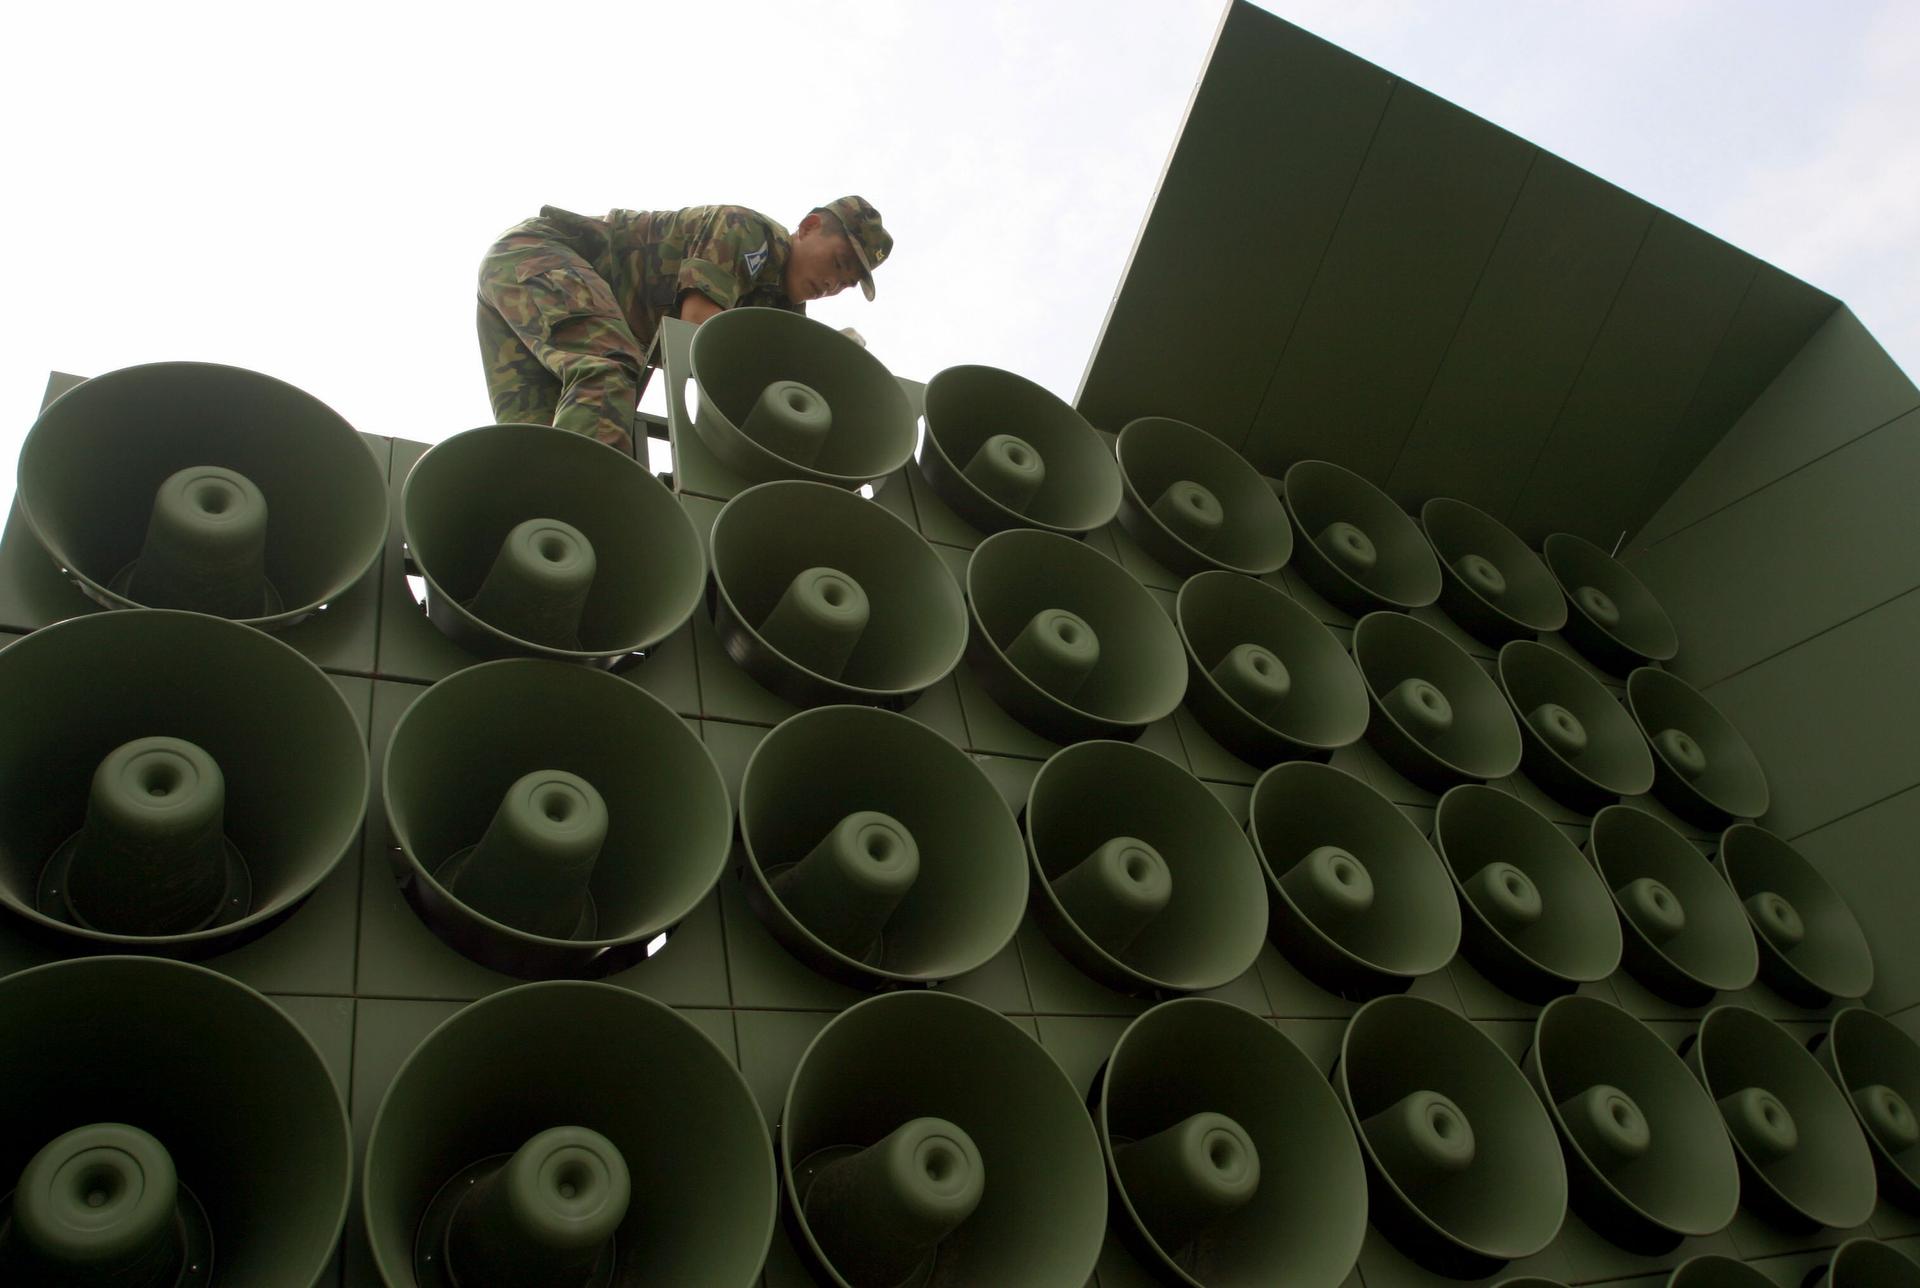 A South Korean soldier works on a stack of loudspeakers used for propaganda purposes near the demiltarized zone.